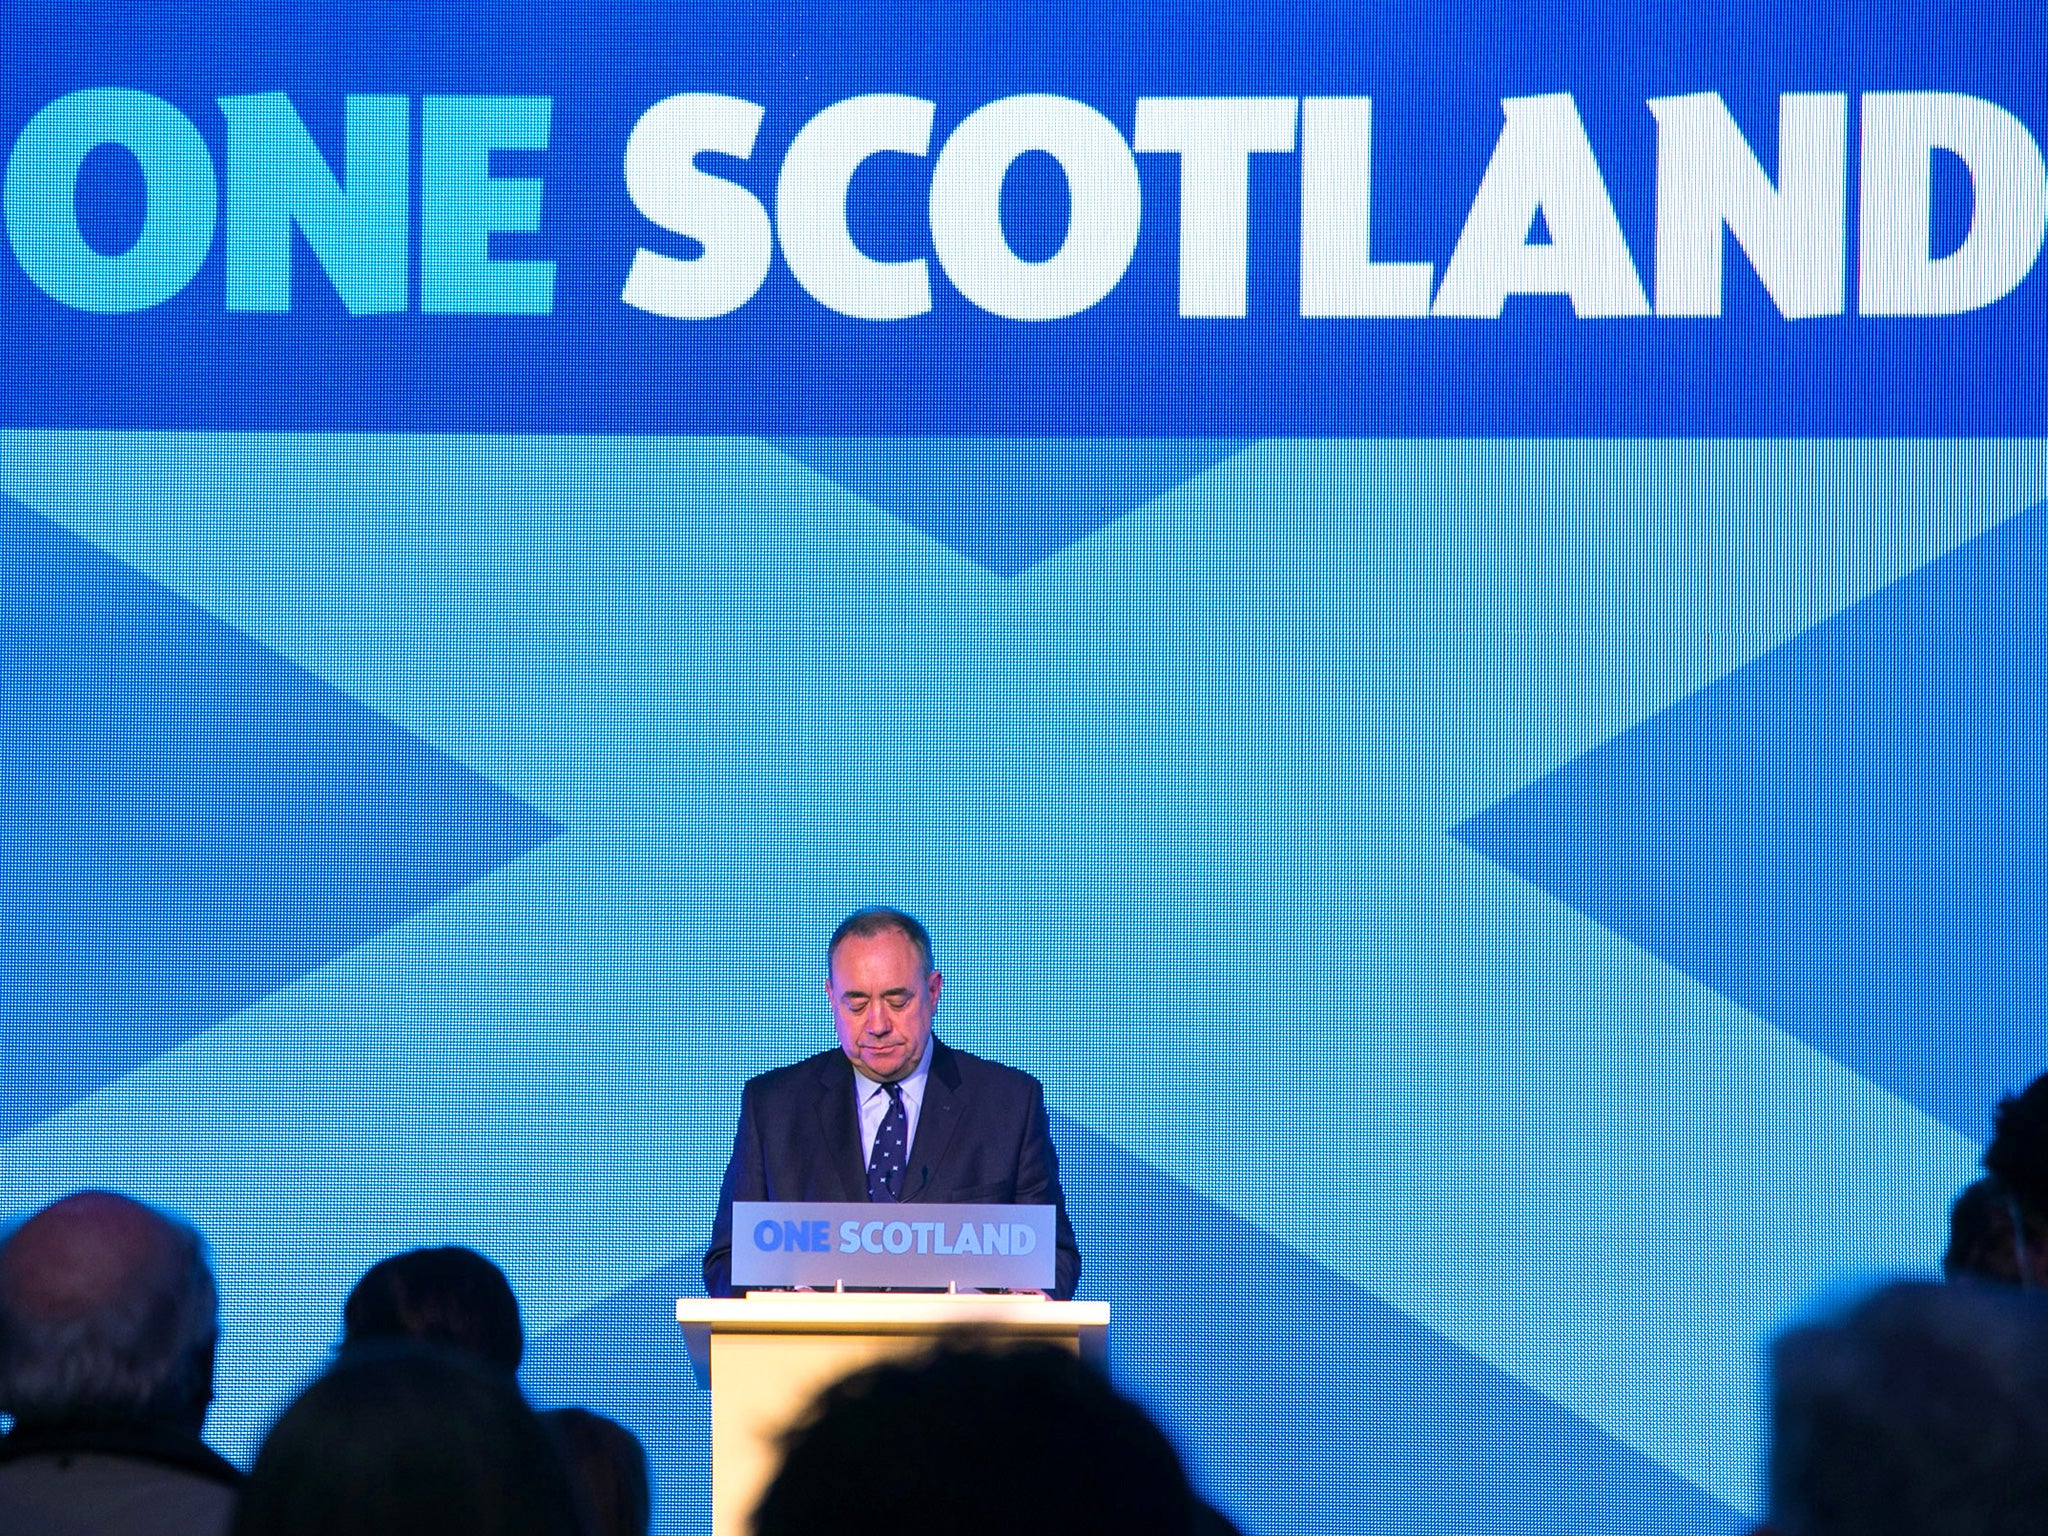 Alex Salmond told the BBC that another vote on Scotland remaining part of the UK was 'inevitable'